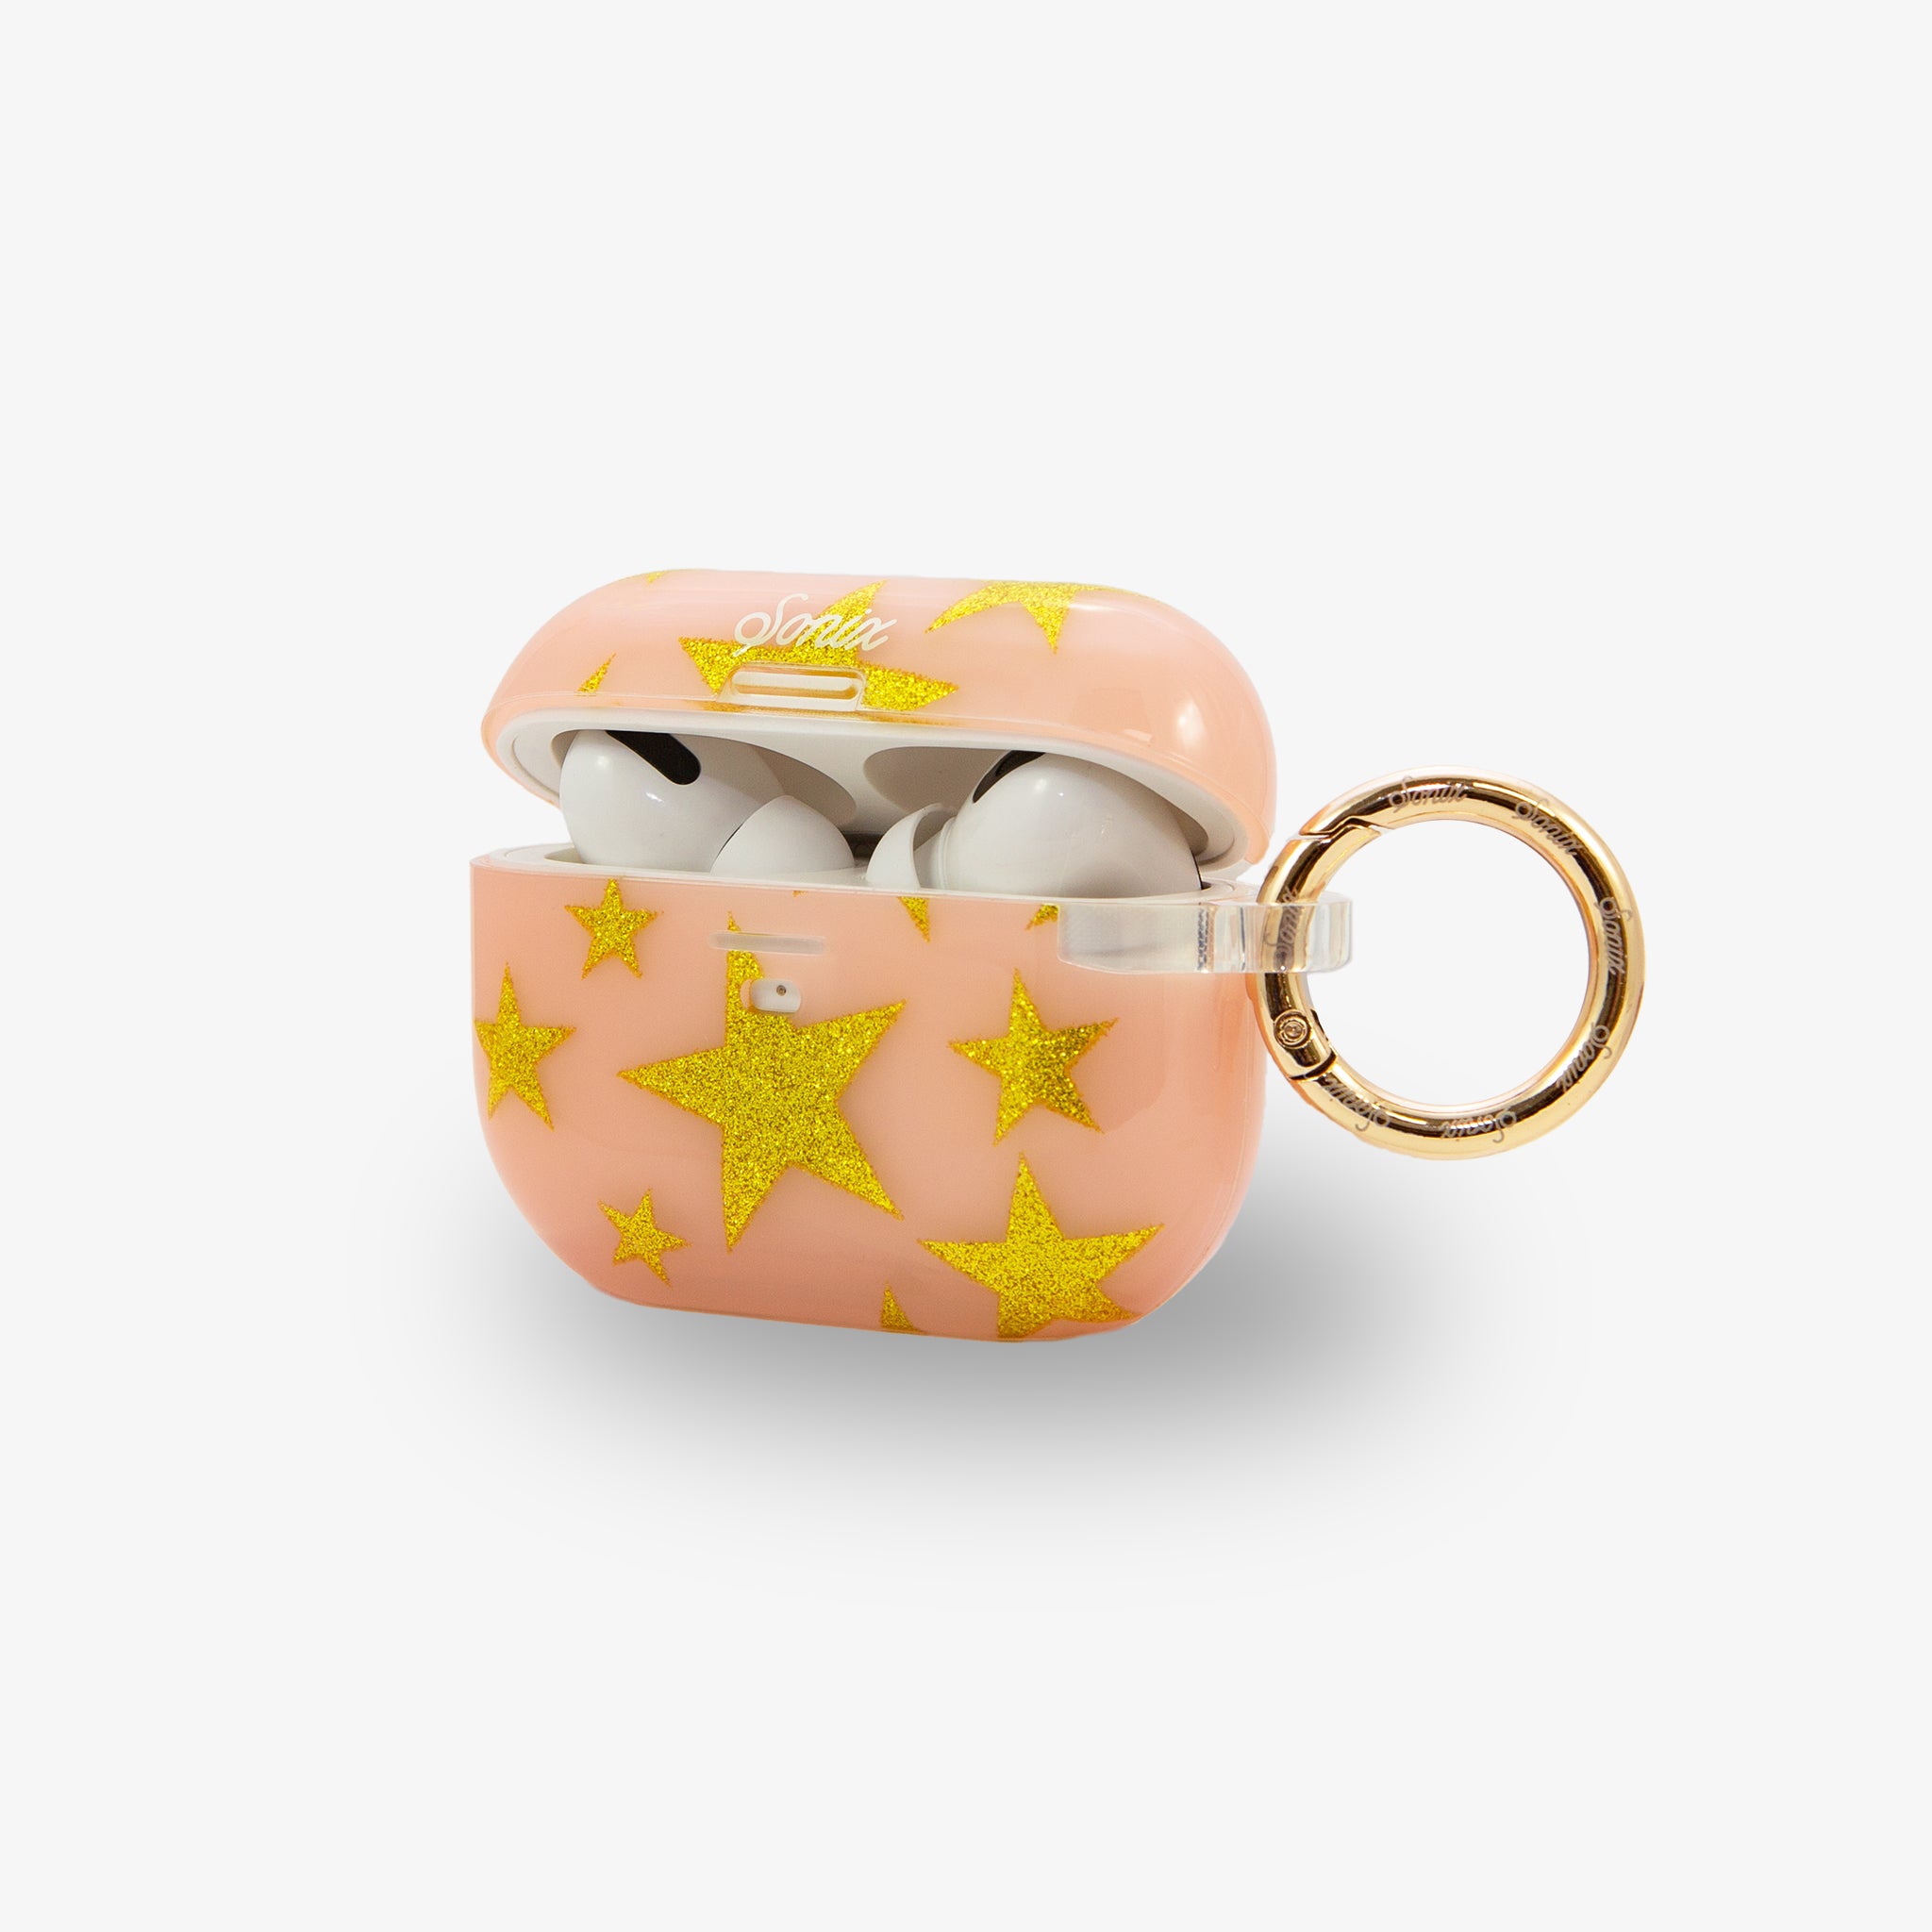 Starry Pink AirPods Case